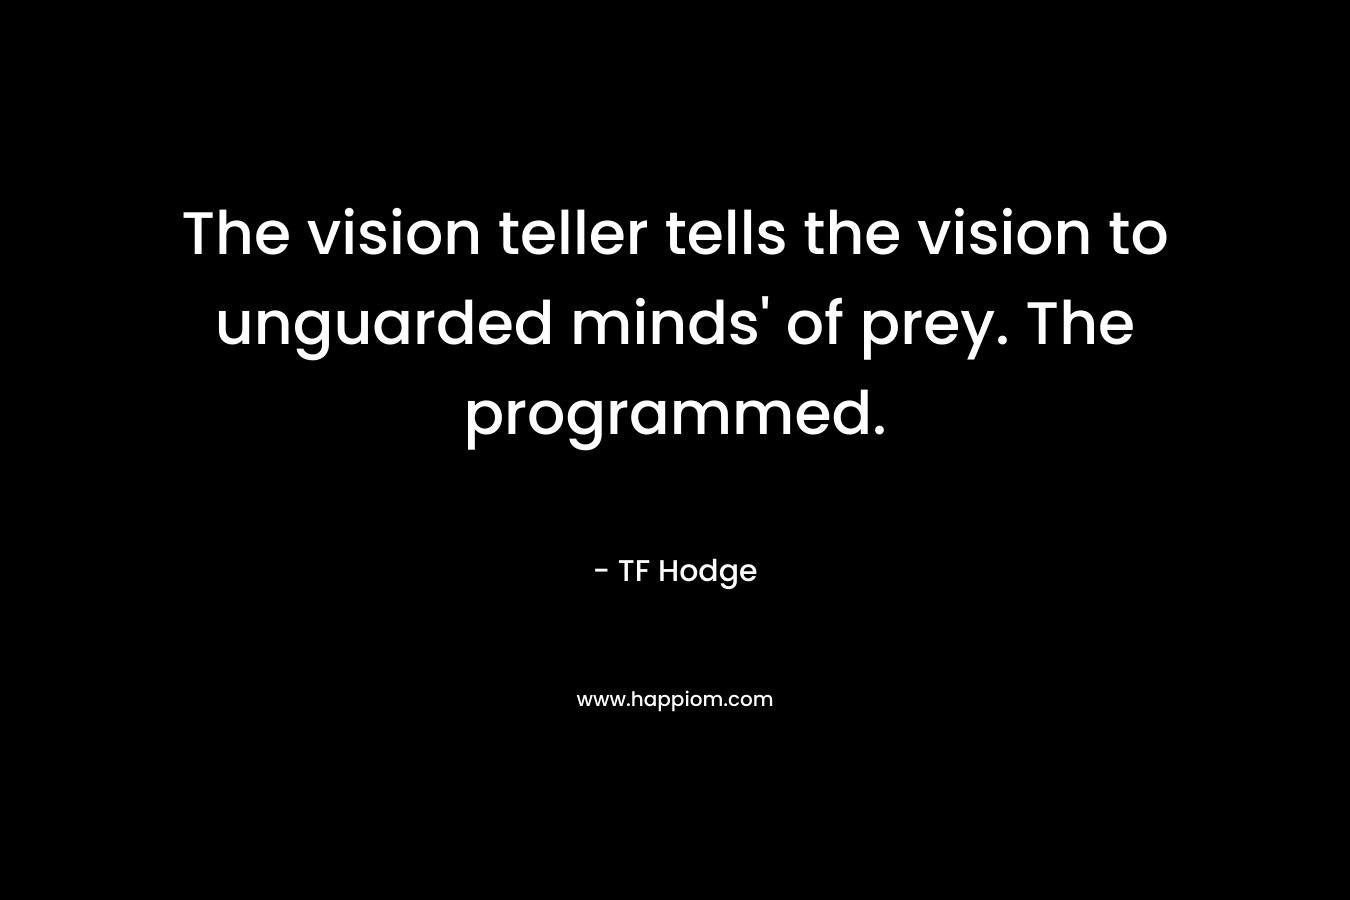 The vision teller tells the vision to unguarded minds’ of prey. The programmed. – TF Hodge